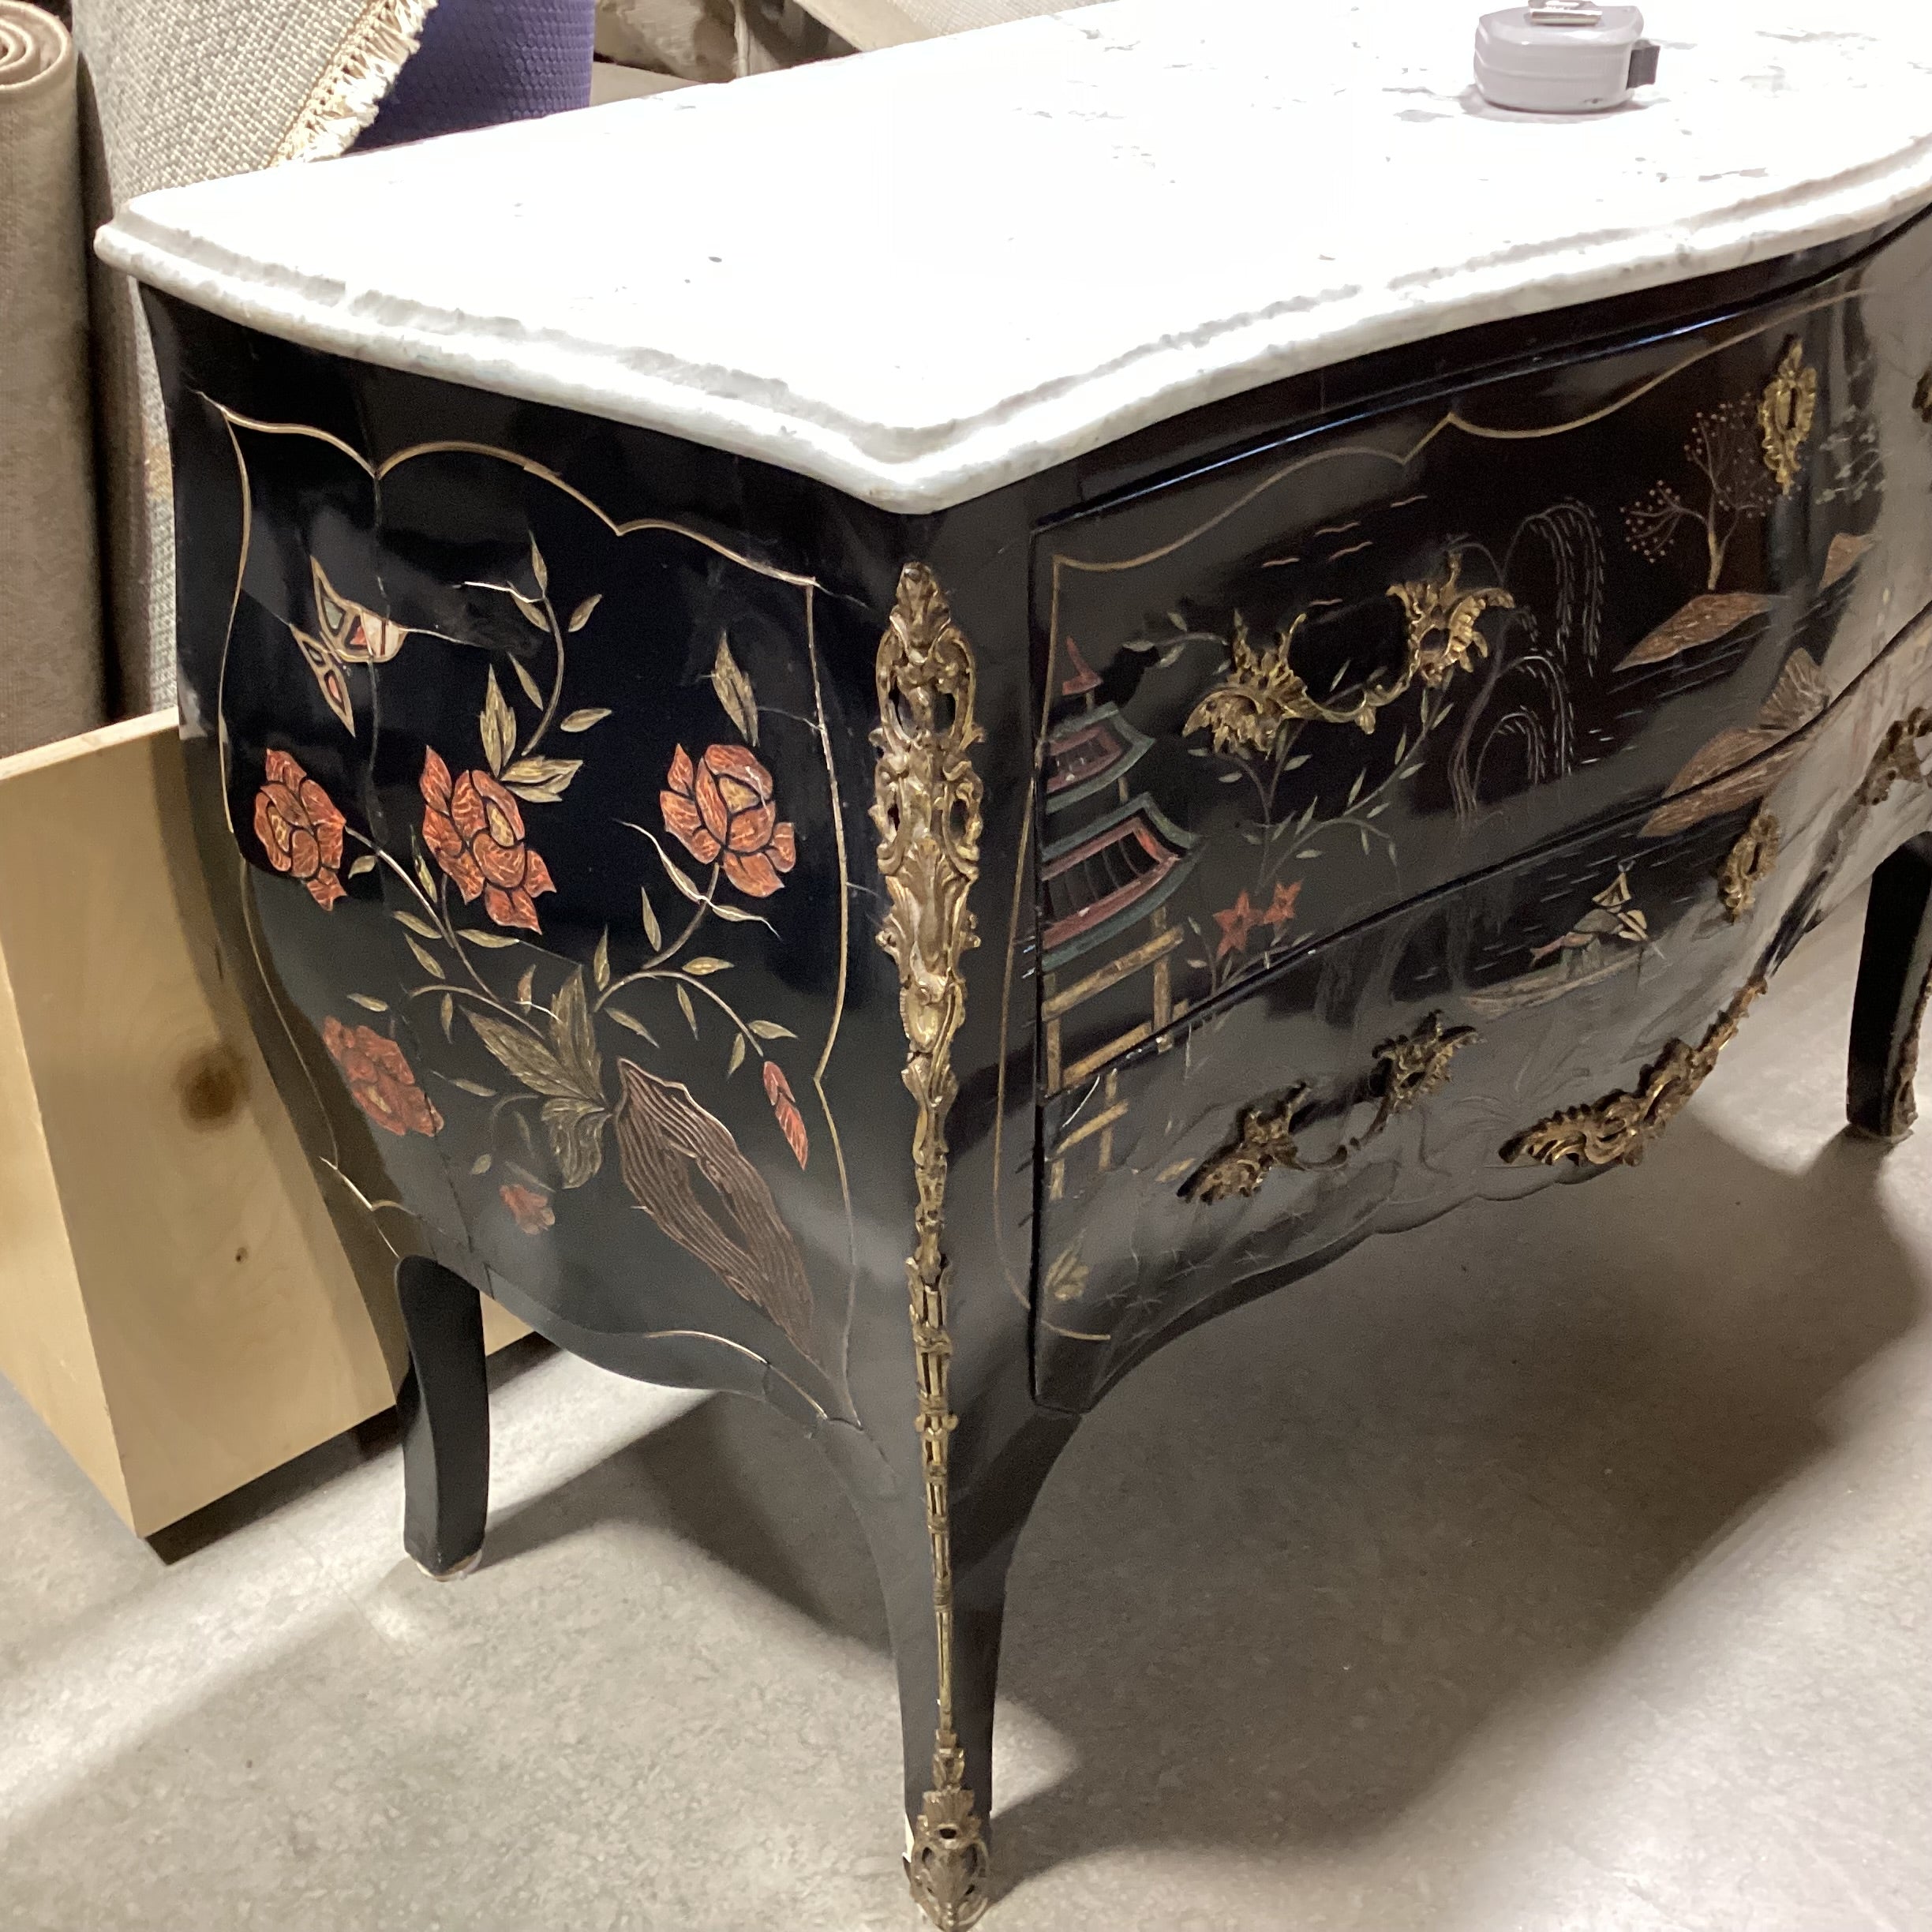 Chinoiserie & Marble Top 2 Drawer Chest 47"x 19.5"x 32"